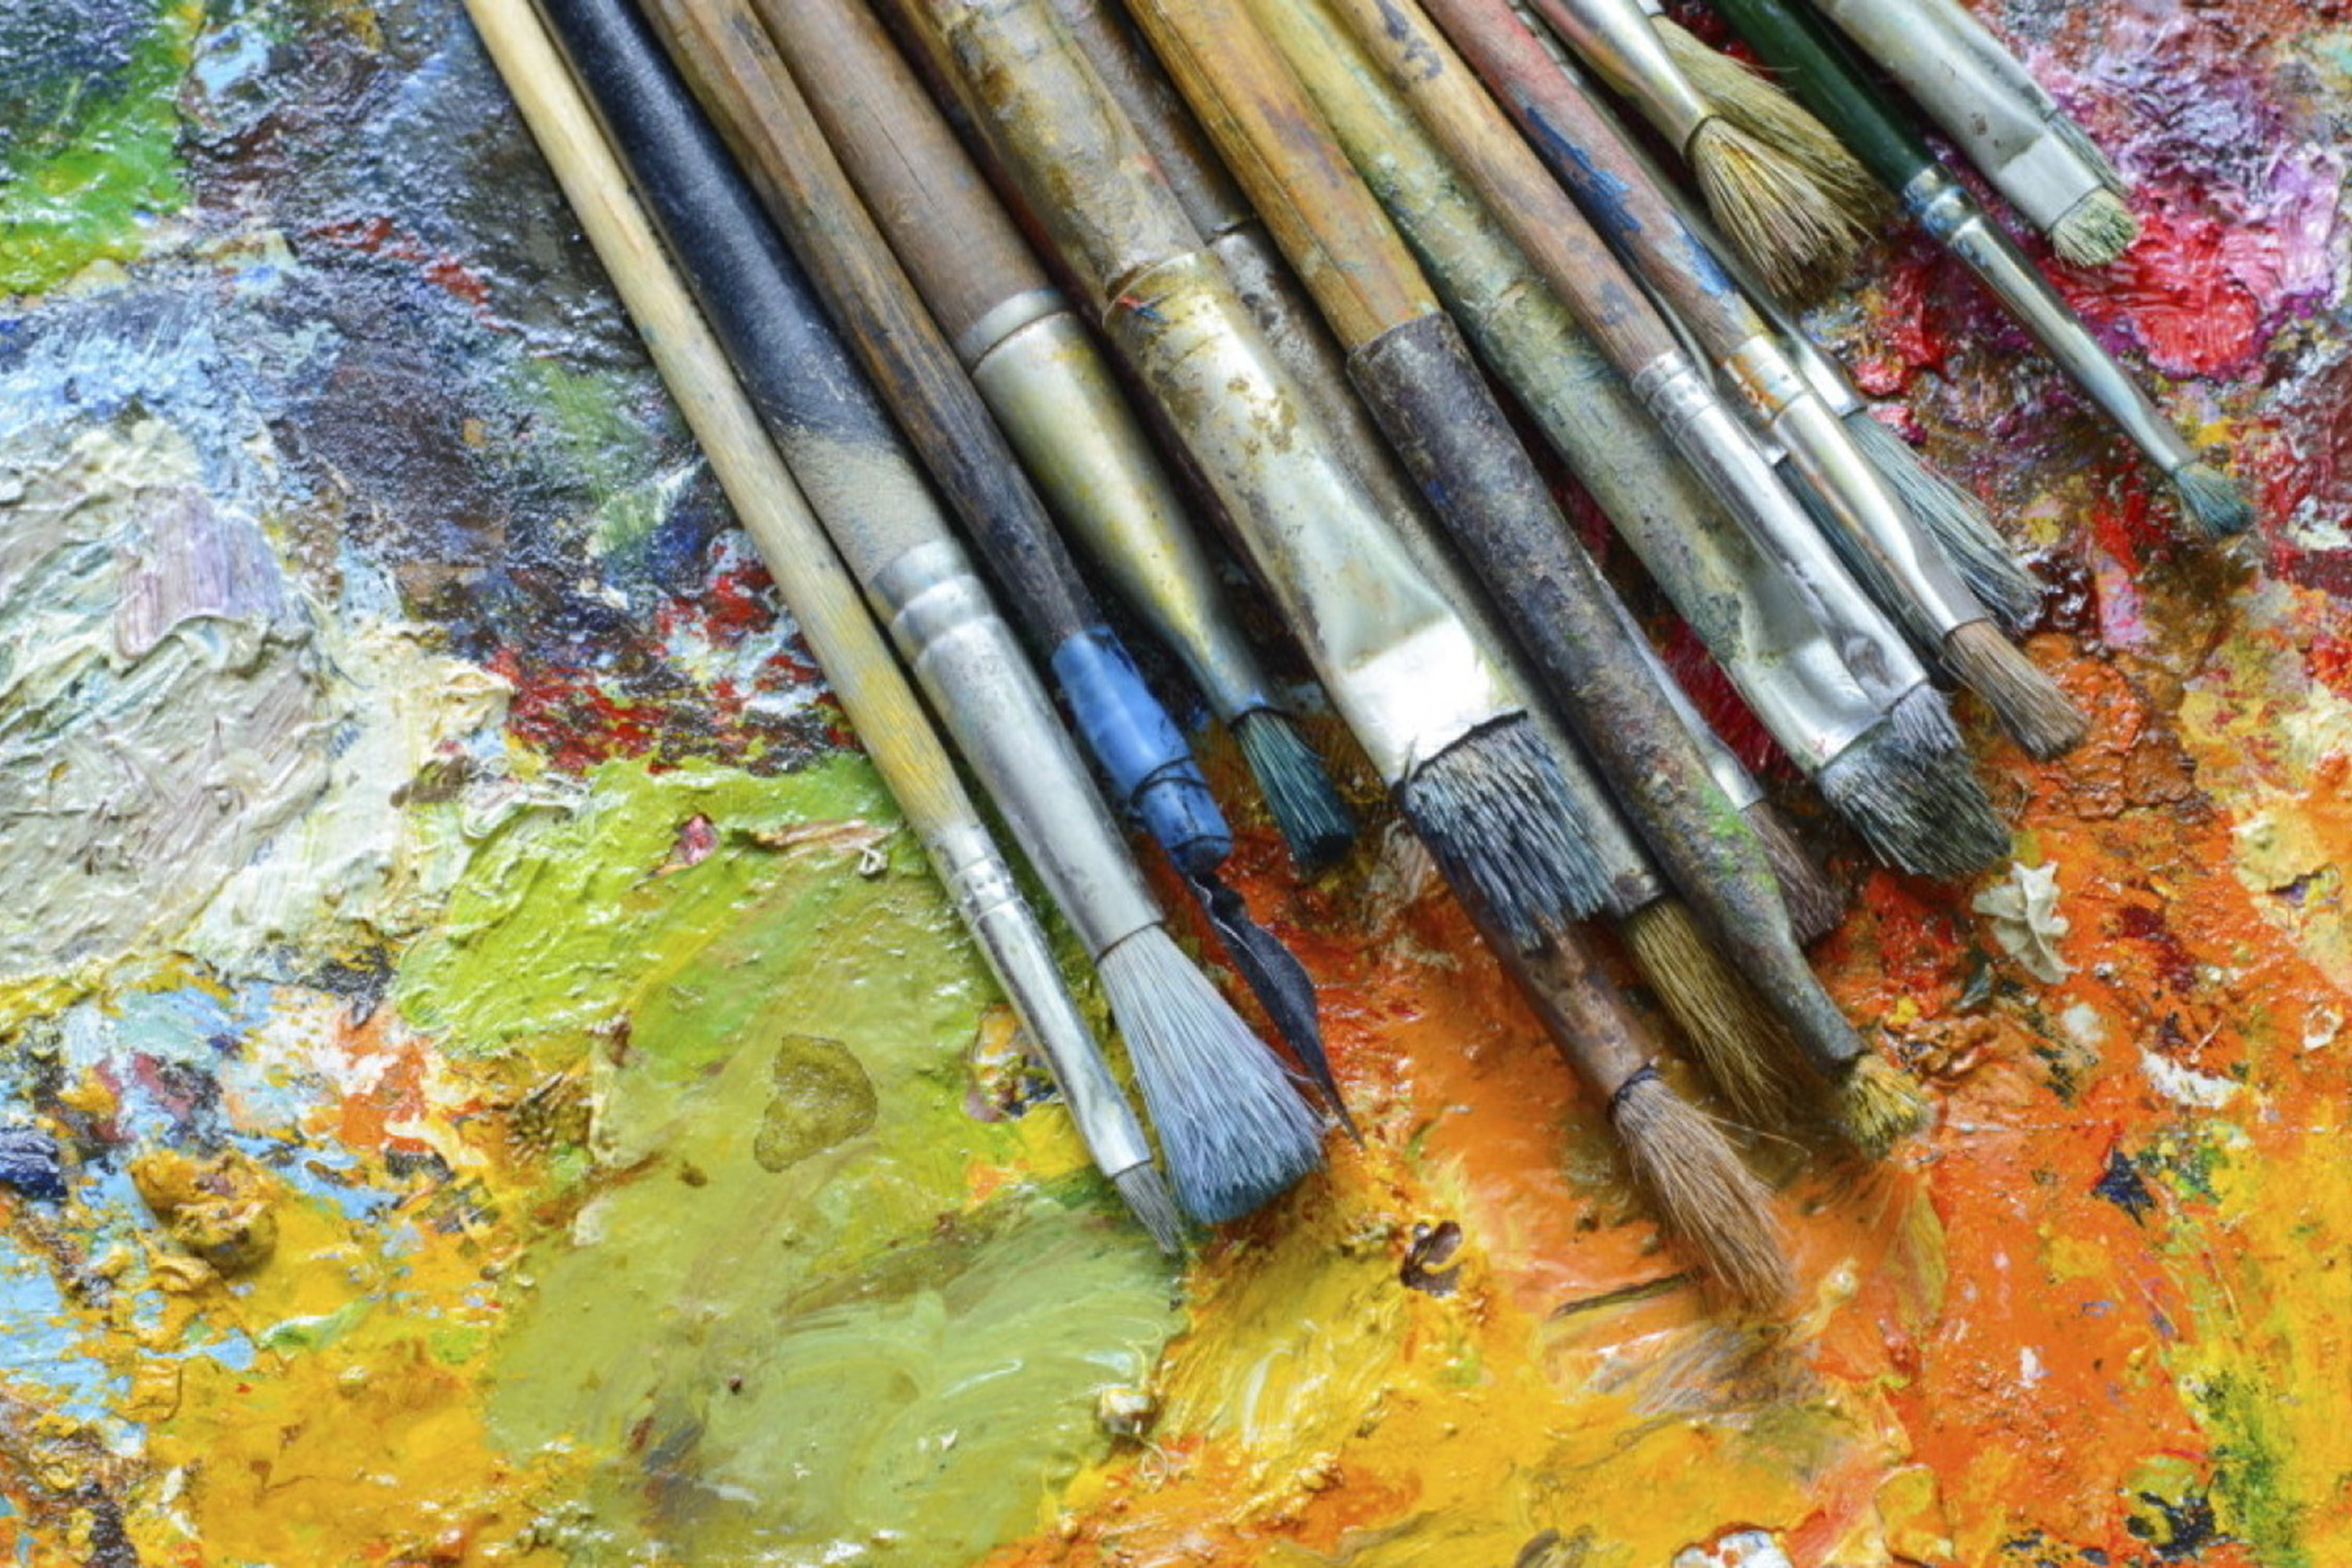  A view of the brushes we supply for your art travel workshop experience in Italy, France, Germany or Spain 